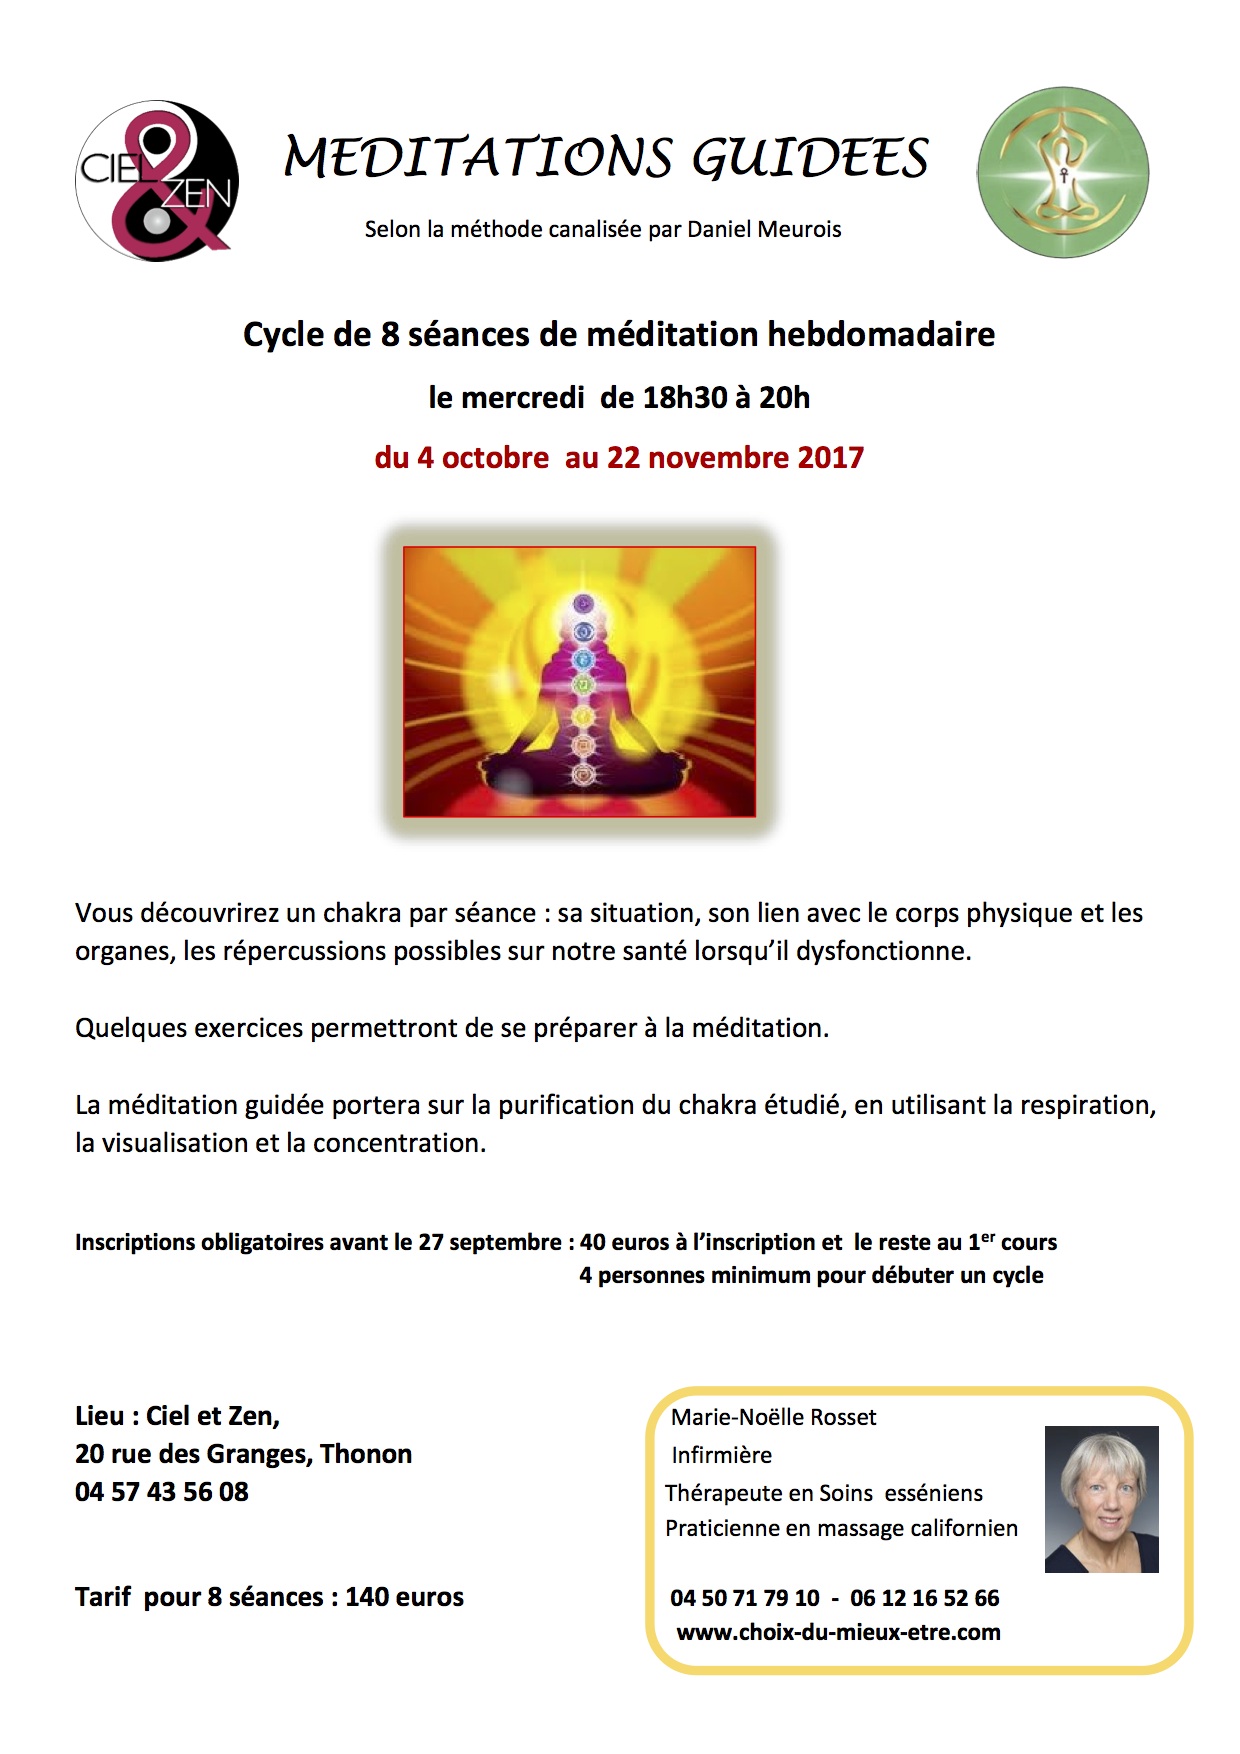 MEDITATIONS GUIDEES CYCLE automne 2017